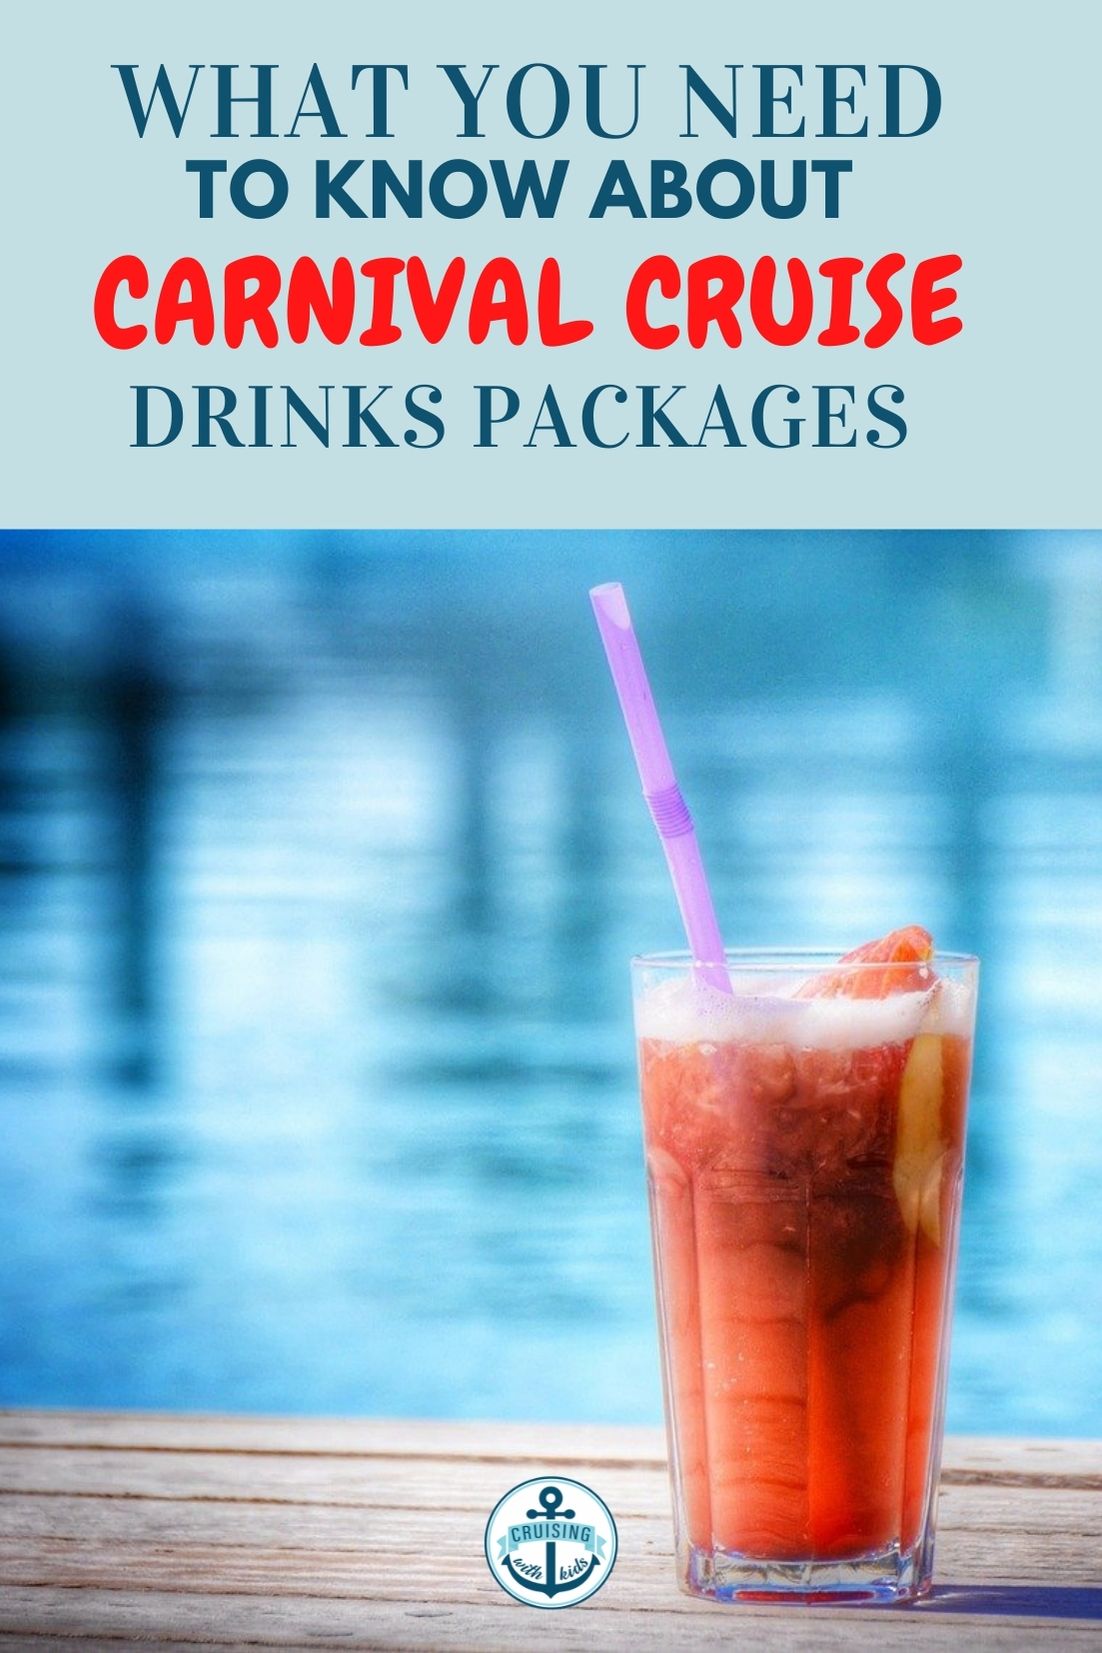 What you to know about Carnival Cruise Drinks Packages